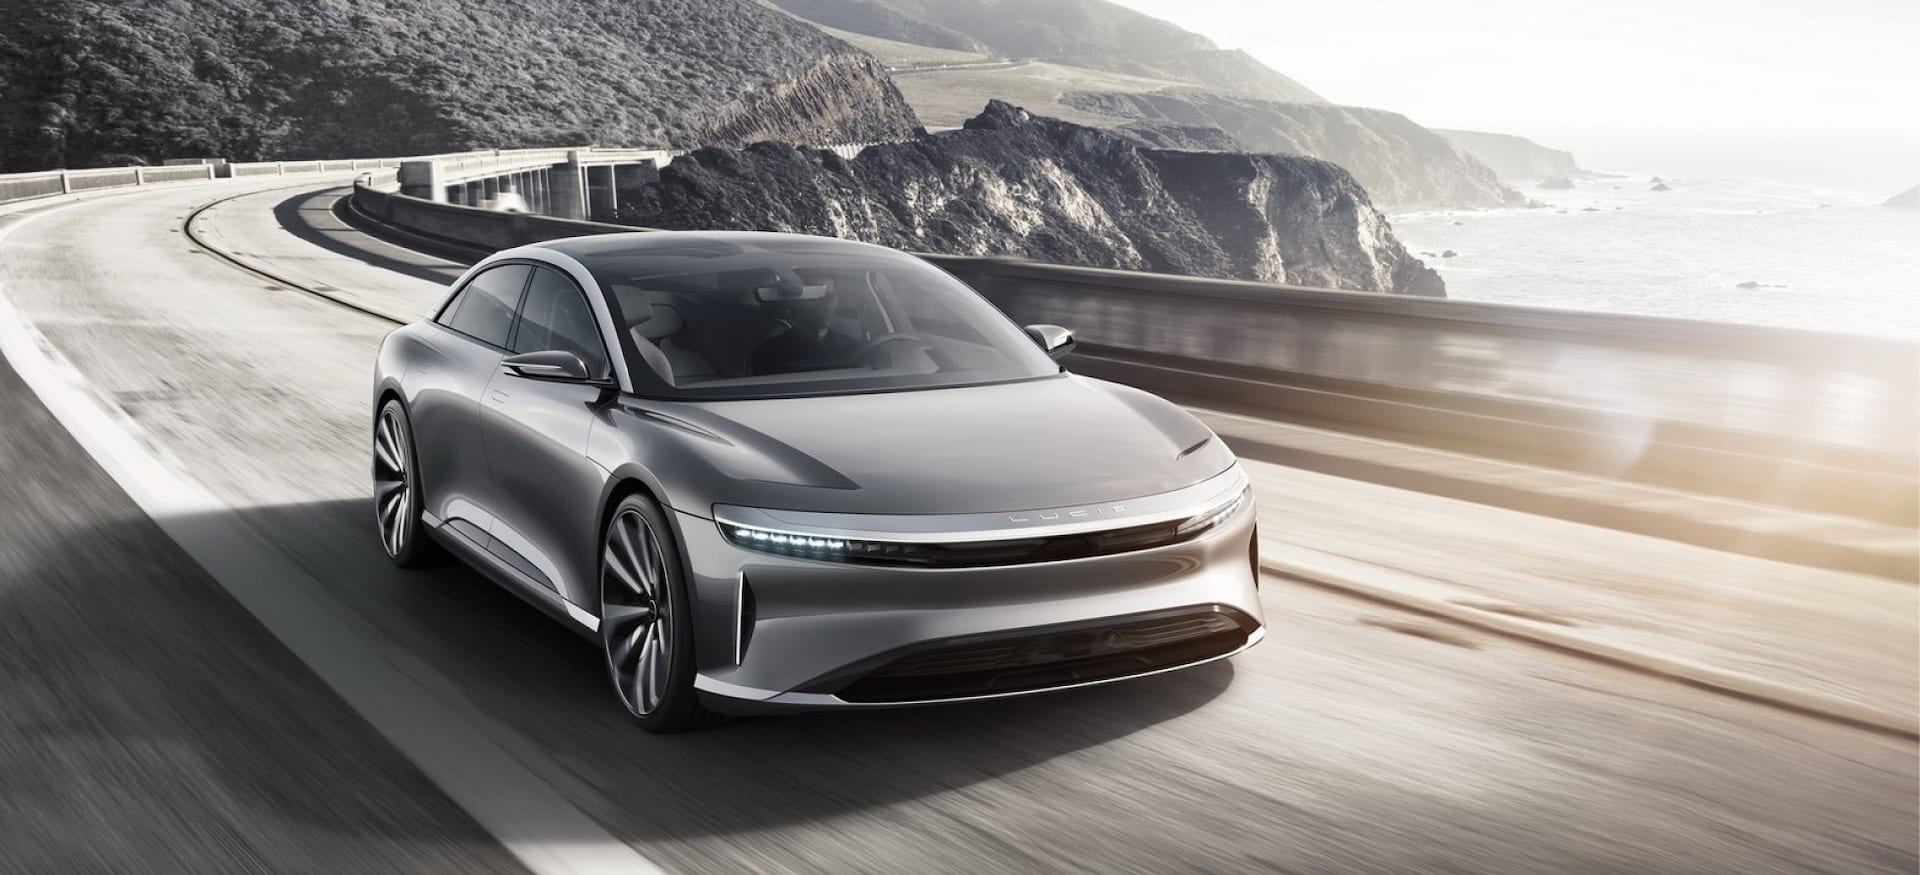 Report: Lucid Air Slated To Use Cylindrical Battery Cells In Productio Vehicles